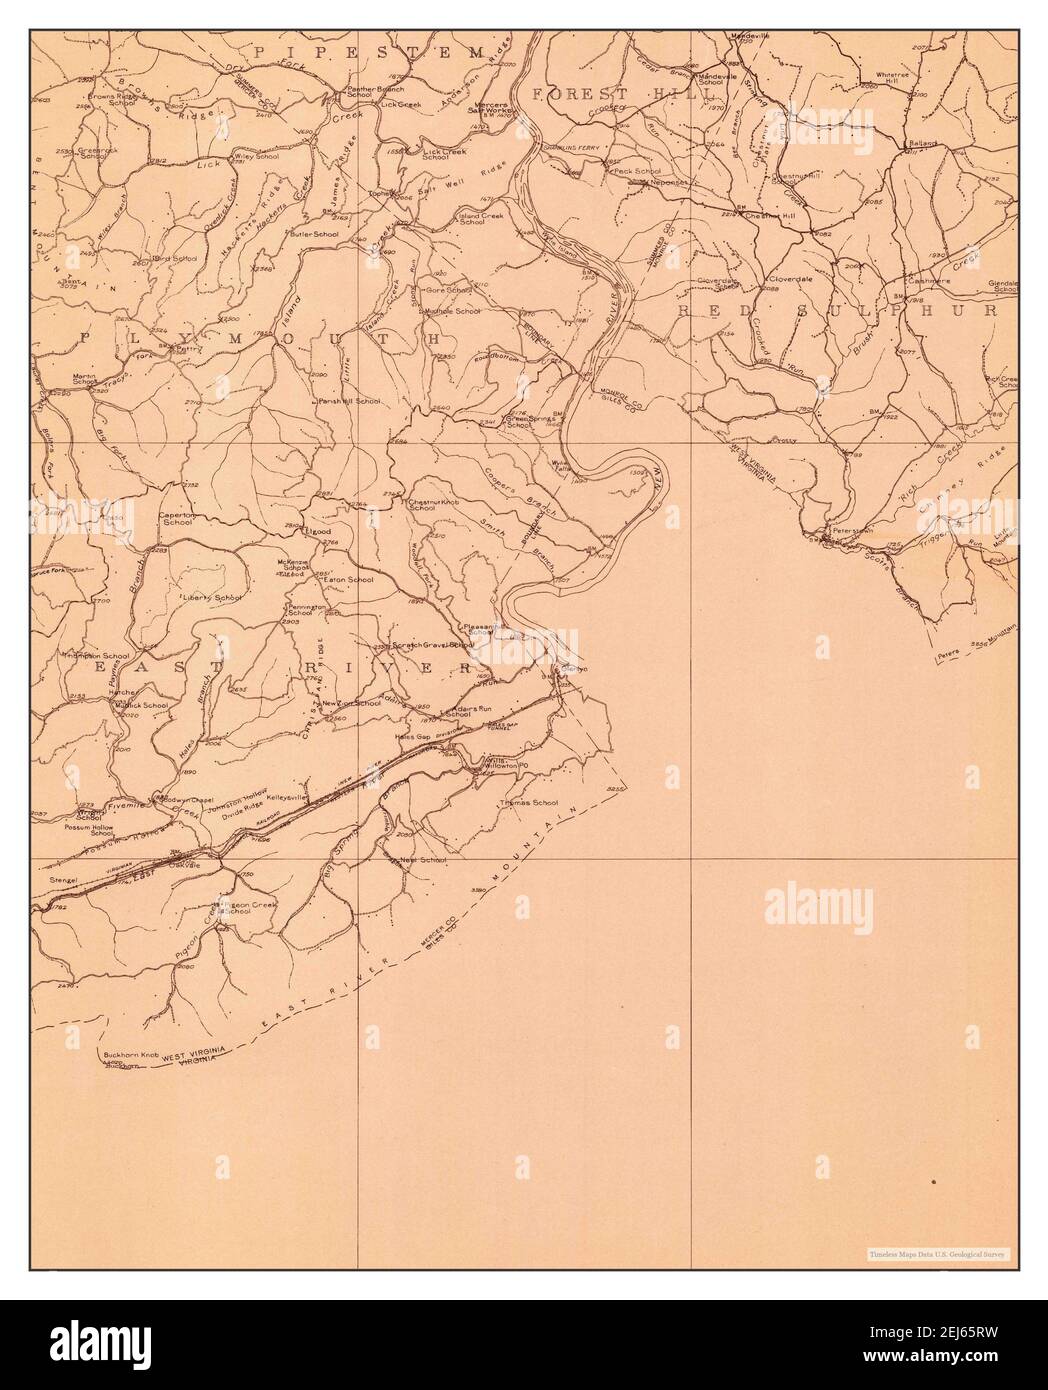 Peterstown, West Virginia, map 1913, 1:48000, United States of America by Timeless Maps, data U.S. Geological Survey Stock Photo